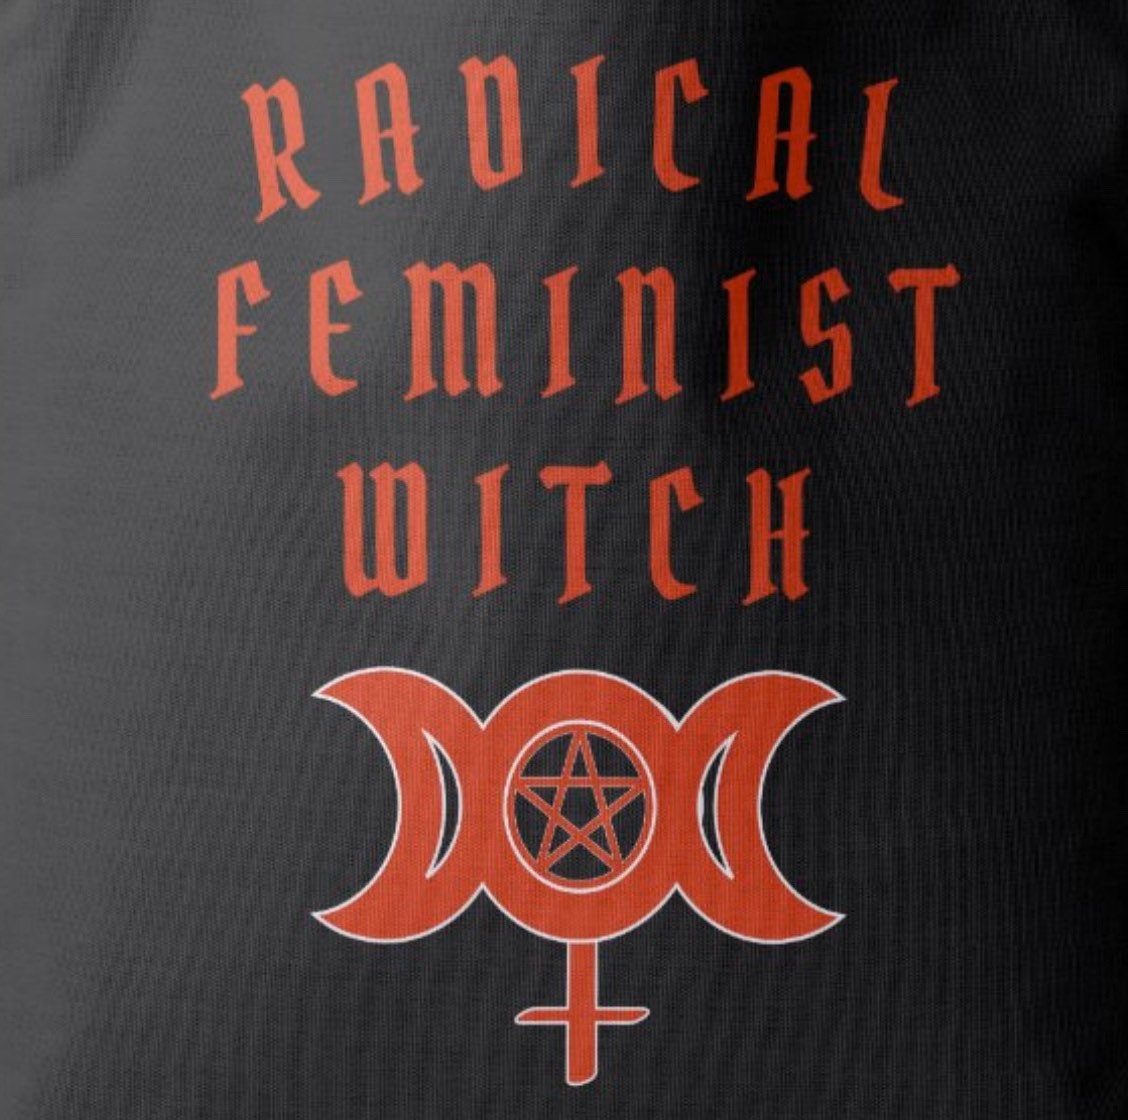 Radical Feminist Witch Tote Bag (Red or Purple)